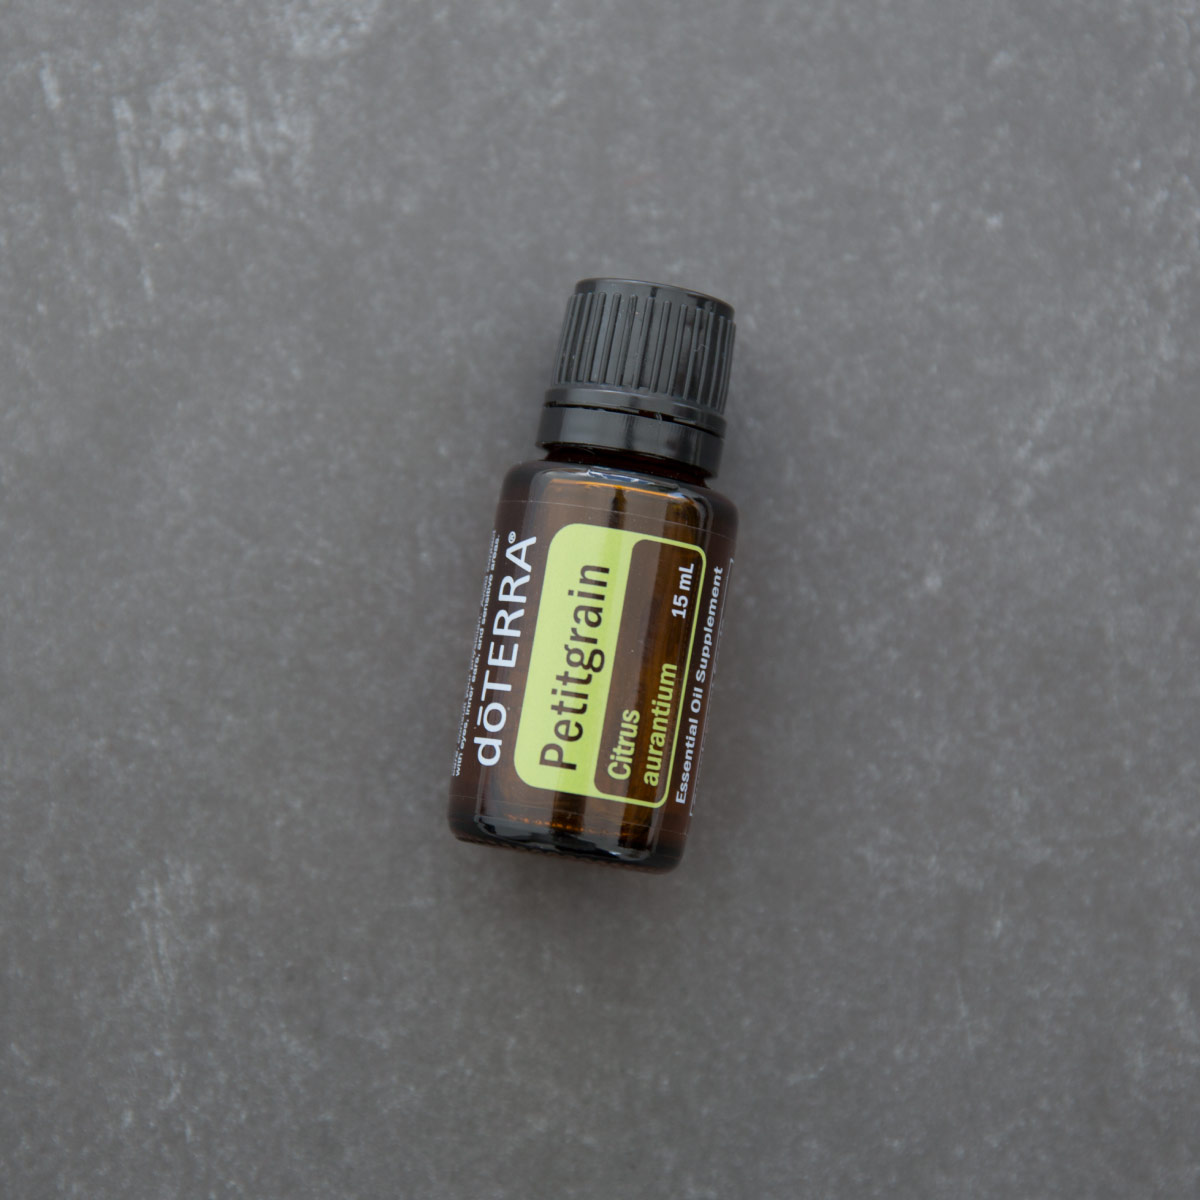 Petitgrain essential oil bottle. Petitgrain essential oil has internal benefits, surface cleansing properties, and can be useful for promoting relaxation. 